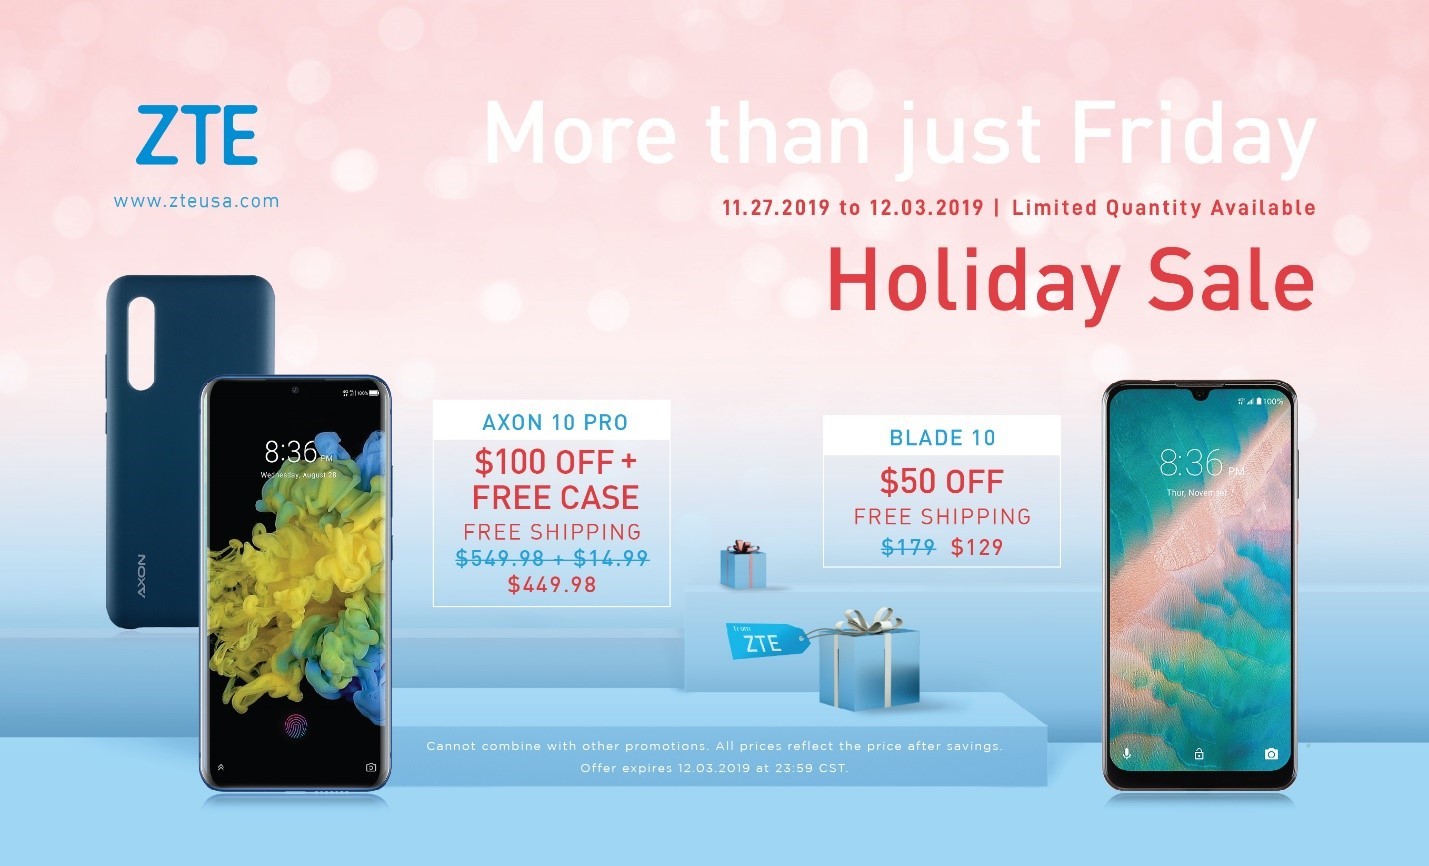 Zte Black Friday Deals Extend To Cyber Monday For Its Most Popular Smartphones Business Wire